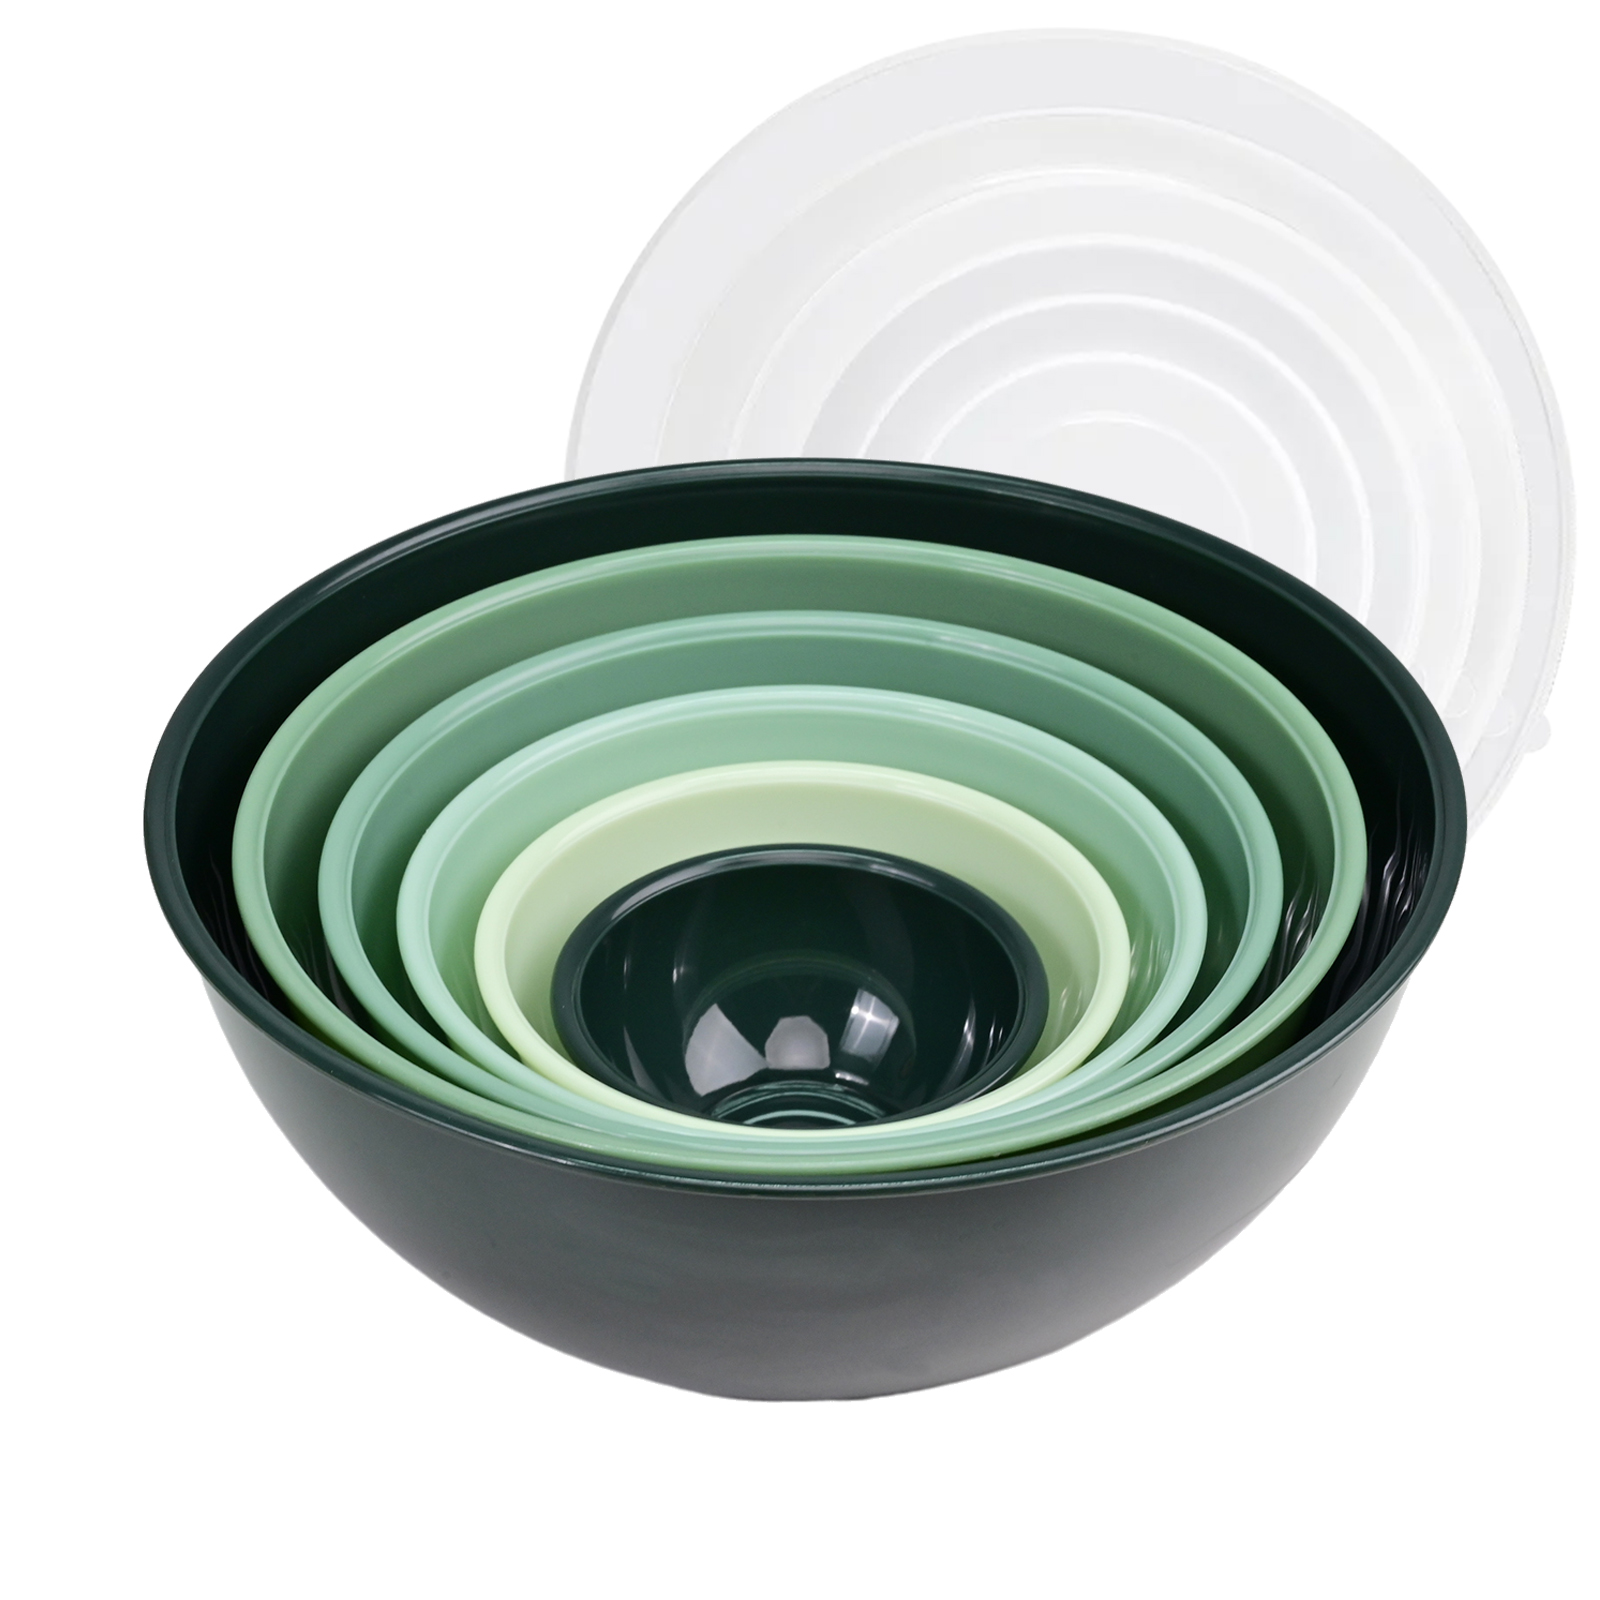 TINANA Plastic Mixing Bowls with Lids Set - 12 Piece Colorful Mixing Bowl Set for Kitchen - Nesting Bowls with Lids Set, 6 Prep Bowls and 6 Lids - Microwave and Freezer Safe (Green Ombre) - image 2 of 7